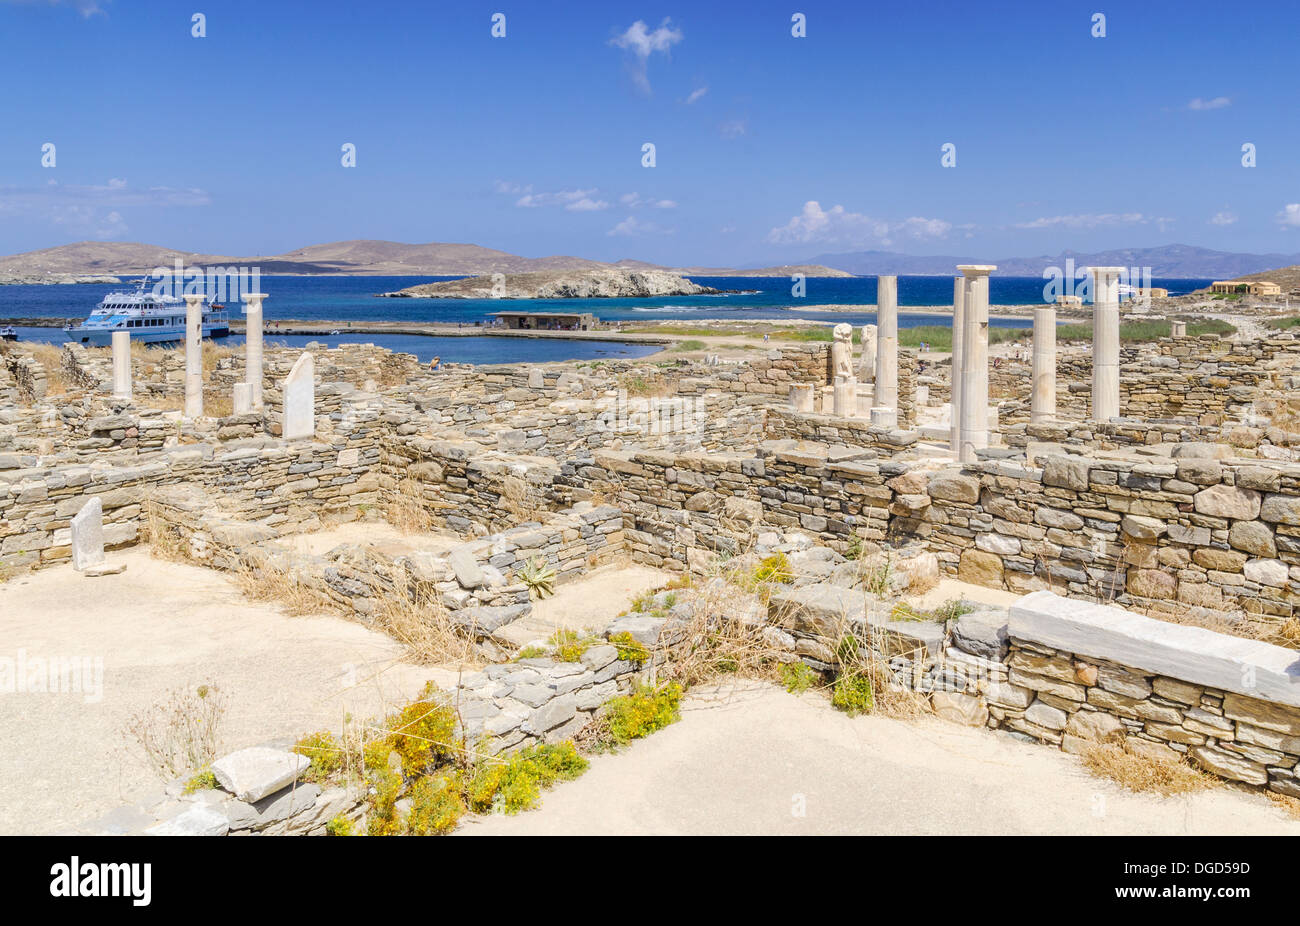 Views over the House of Cleopatra on Delos Island, Cyclades, Greece Stock Photo